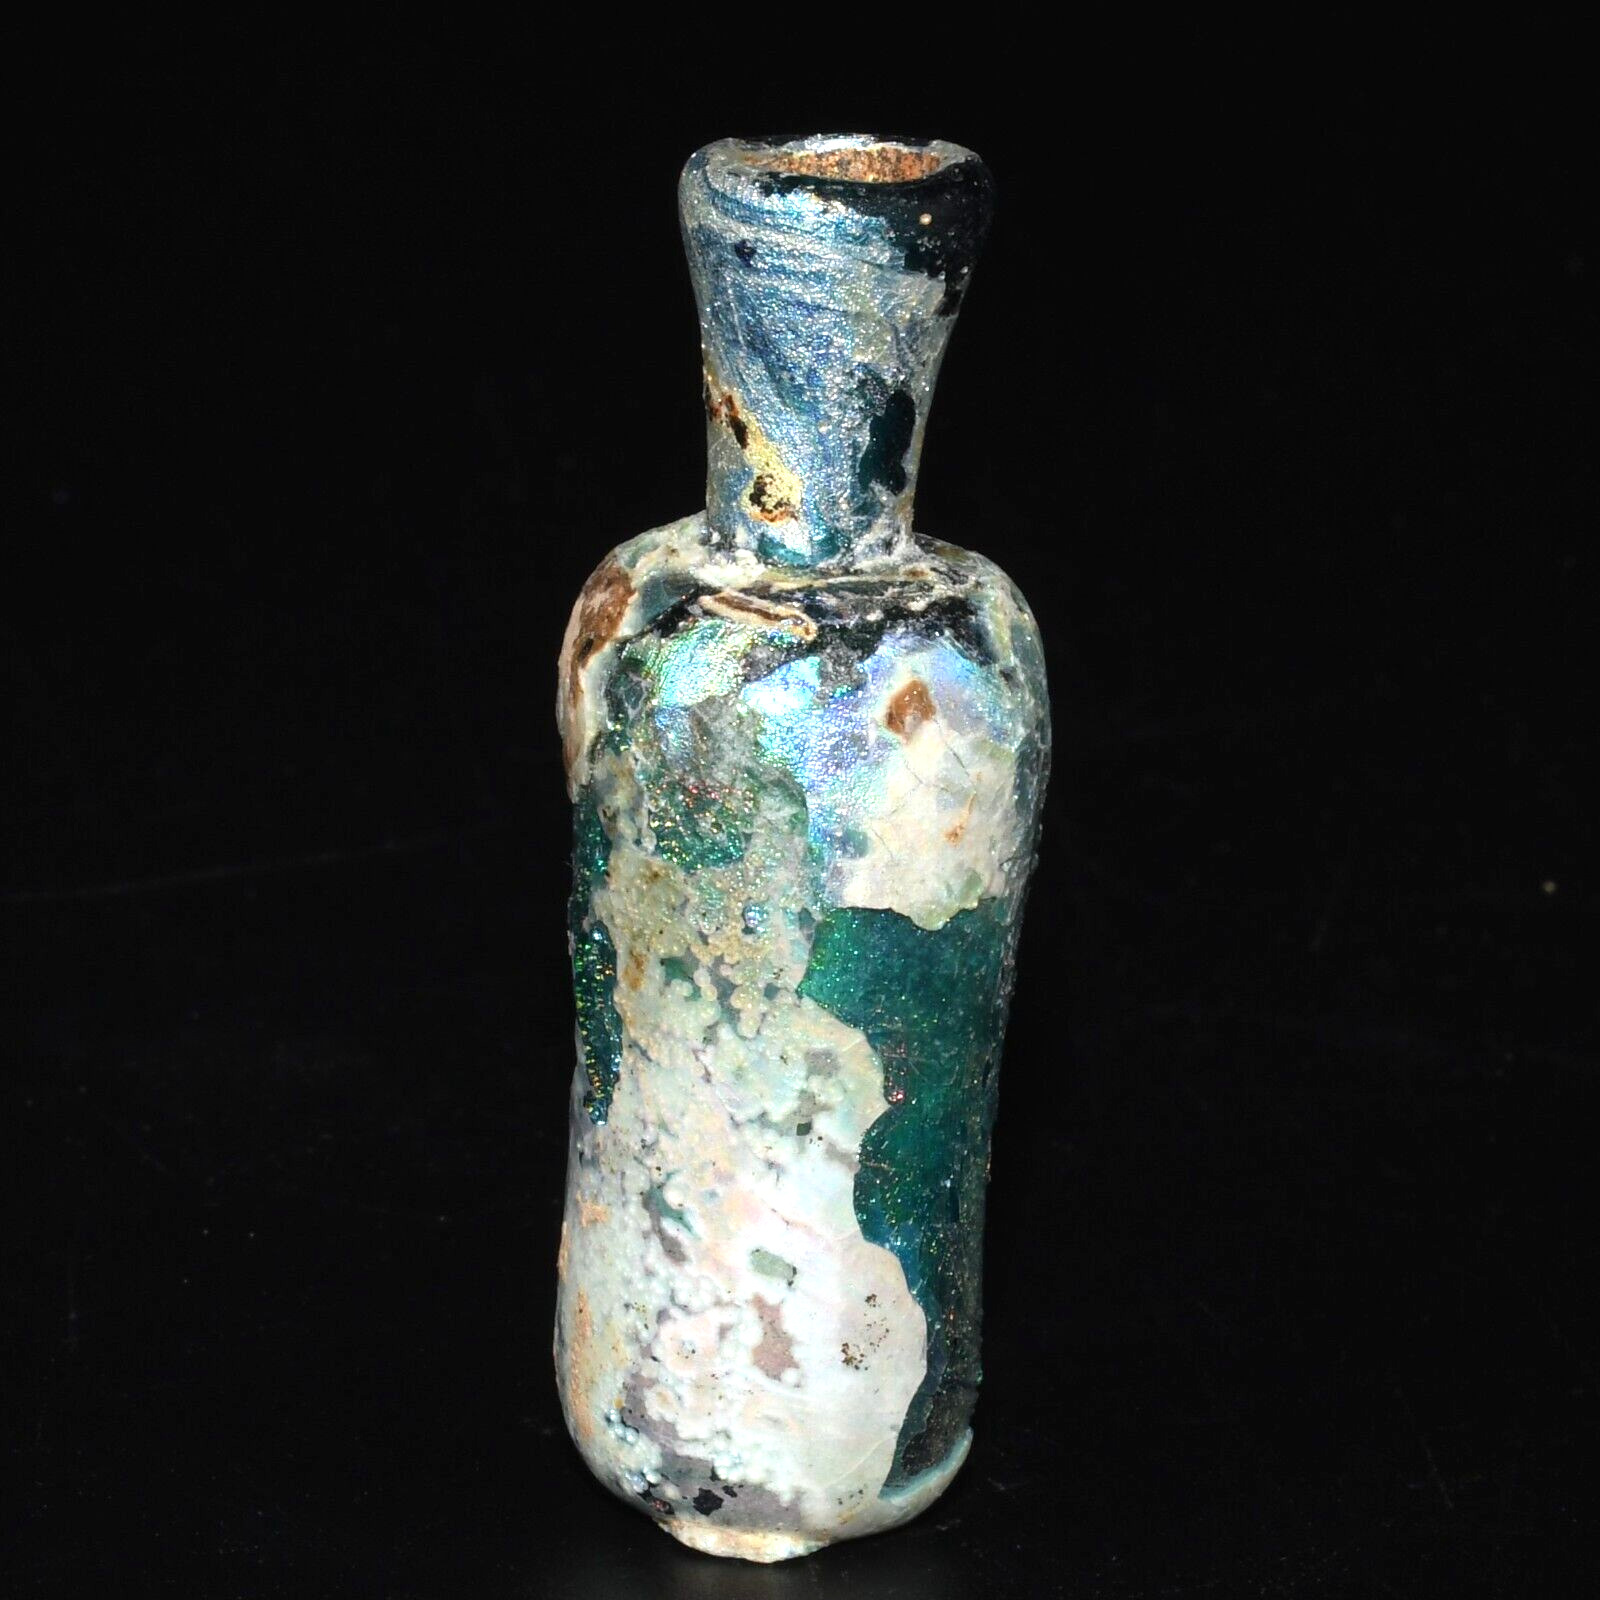 Ancient Roman Glass Bottle Vial with Beautiful Iridescent Patina 1st Century AD